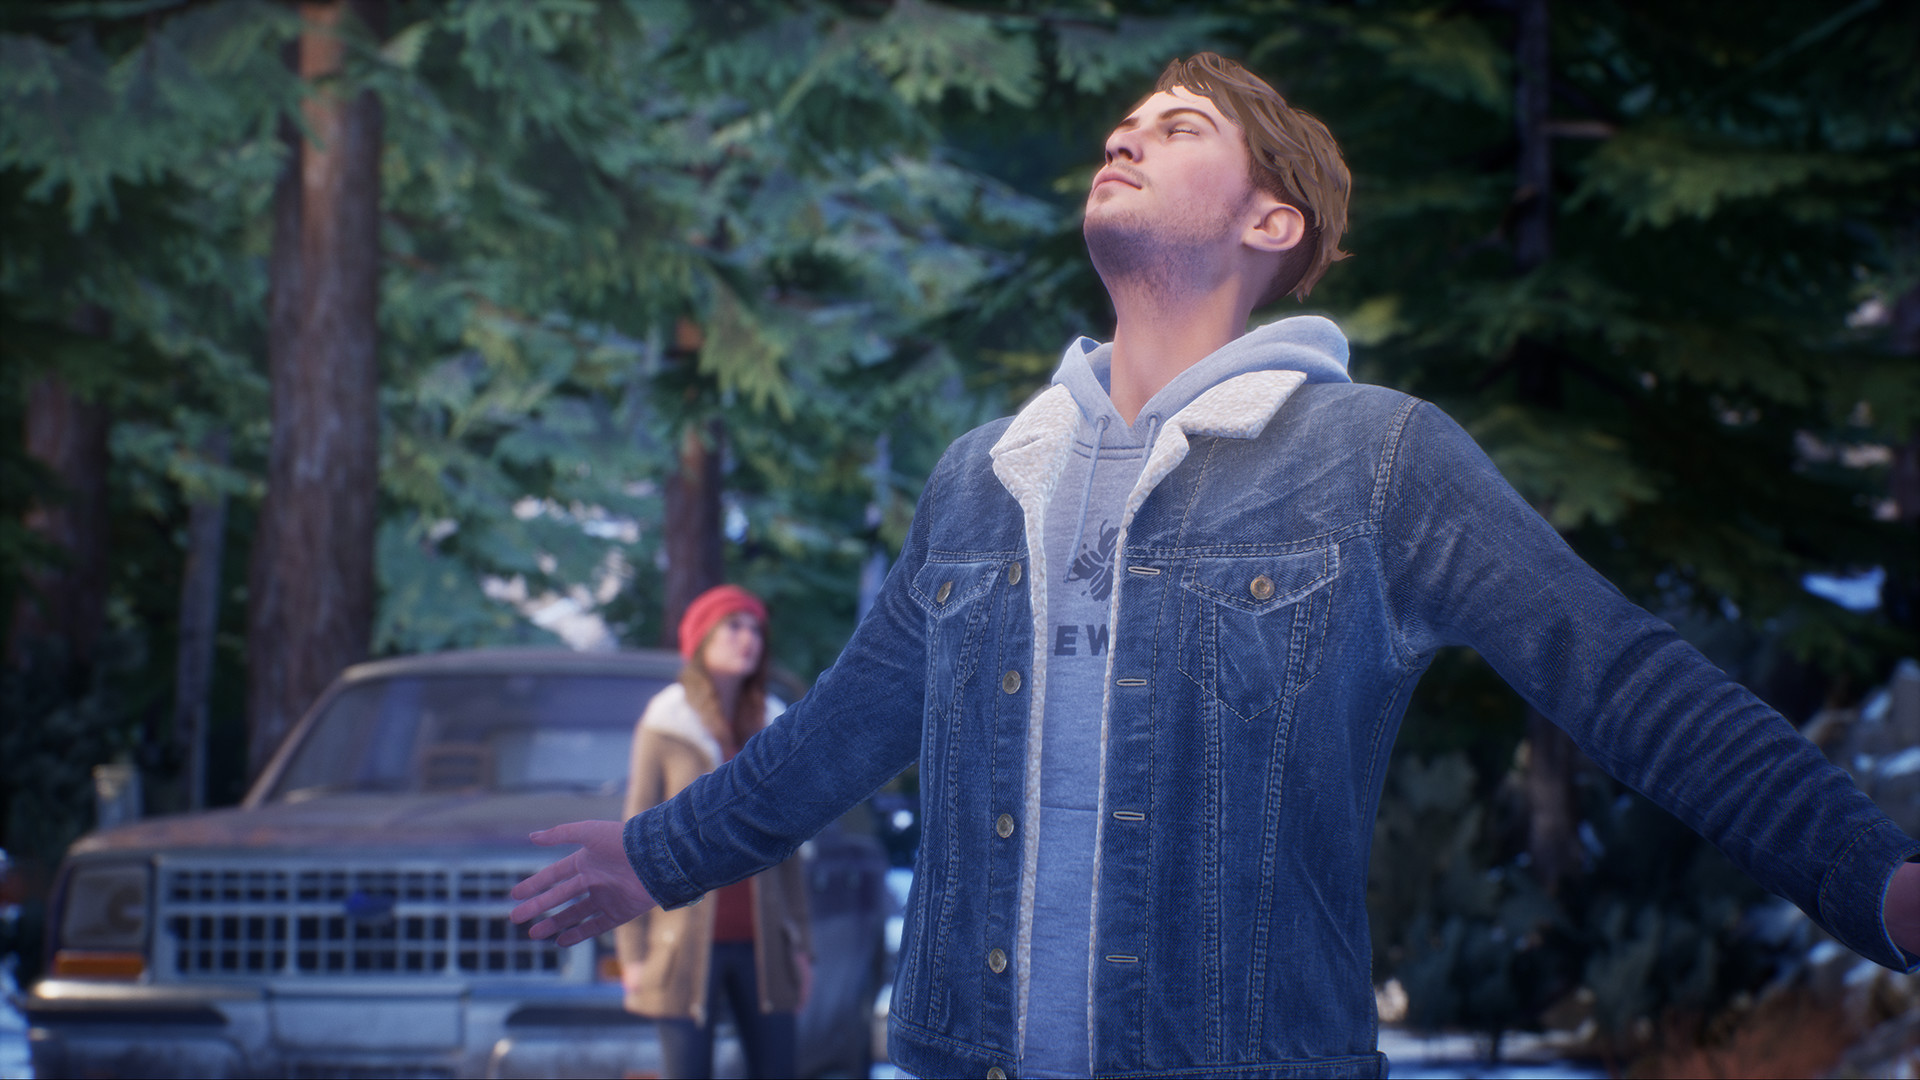  Tell Me Why, a narrative adventure from the creators of Life Is Strange, is free to keep on Steam right now to celebrate Pride month, and… hold on, haven't we done this before? 